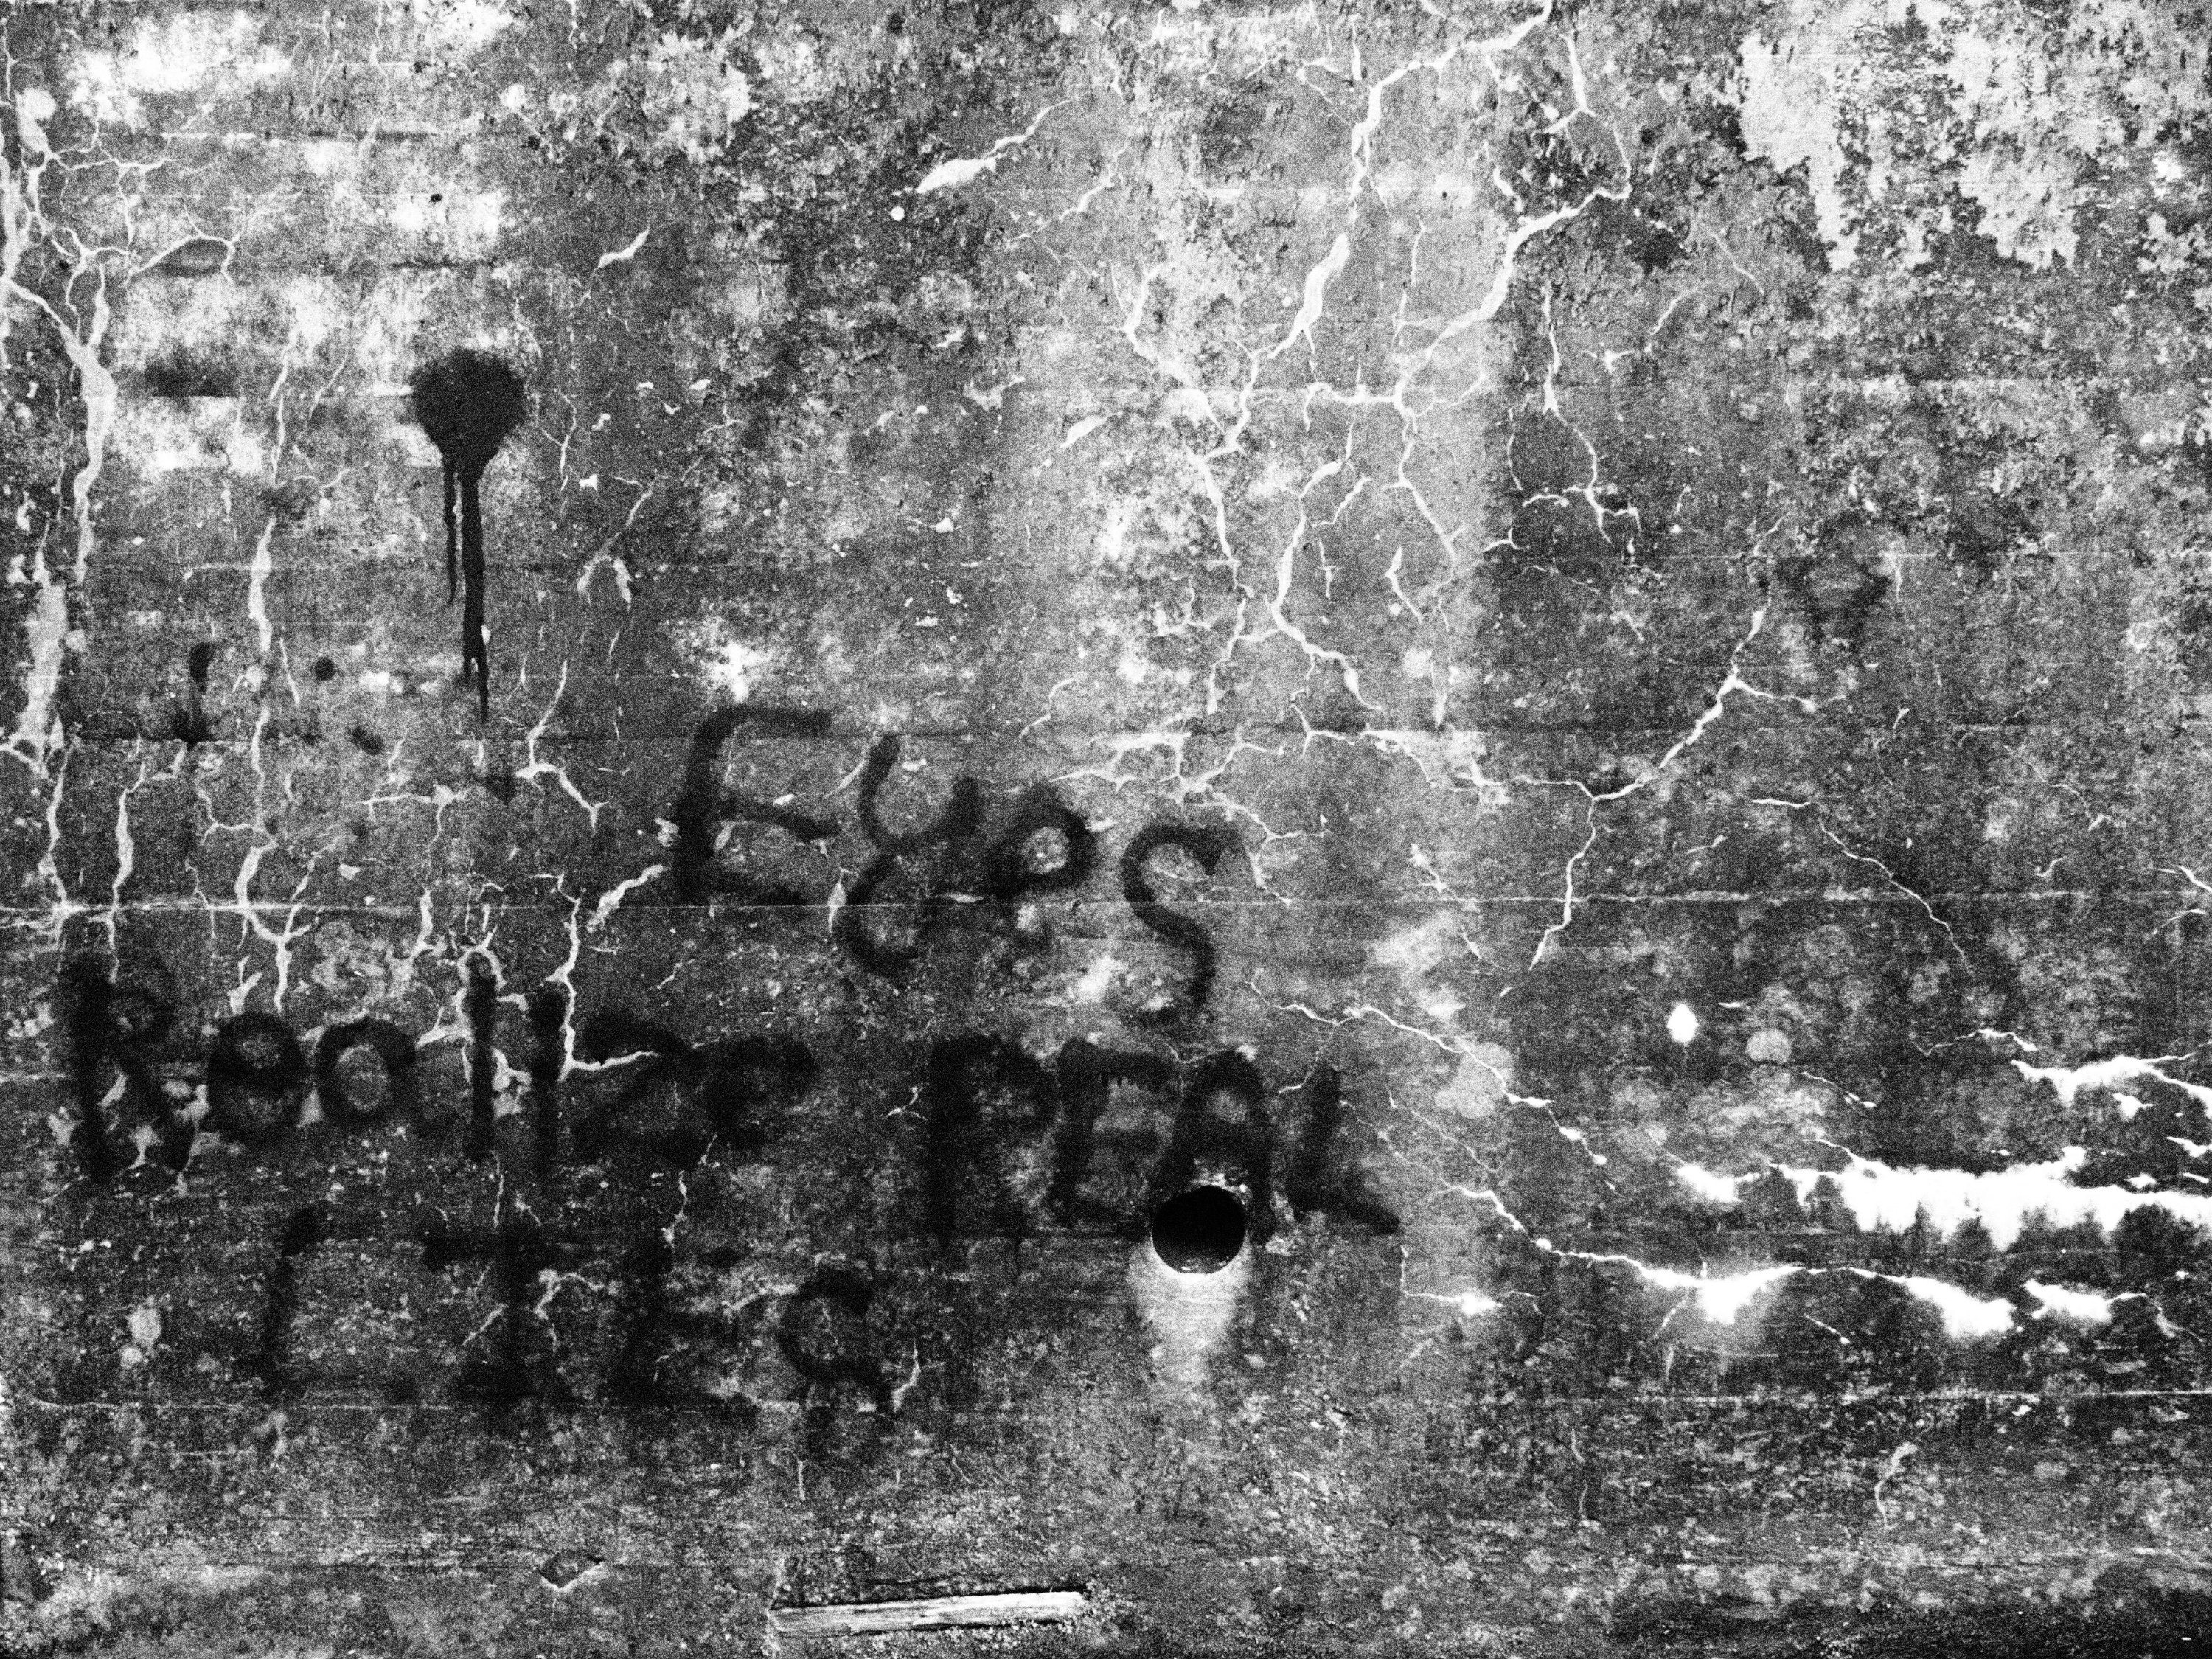 Graffity writing on cracked concrete: "Eyes realize real lies"